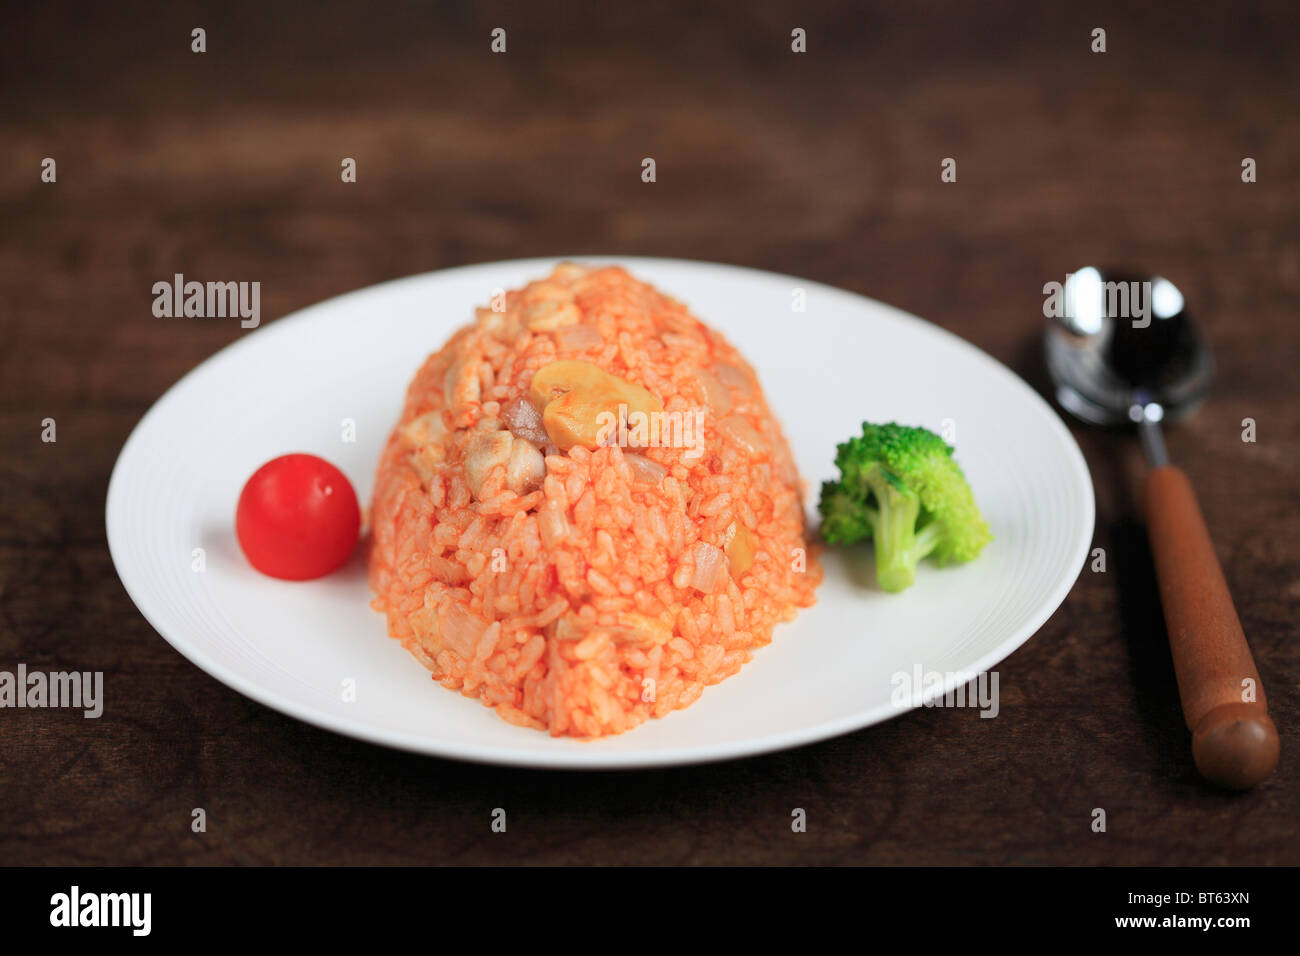 Fried rice with chicken Stock Photo